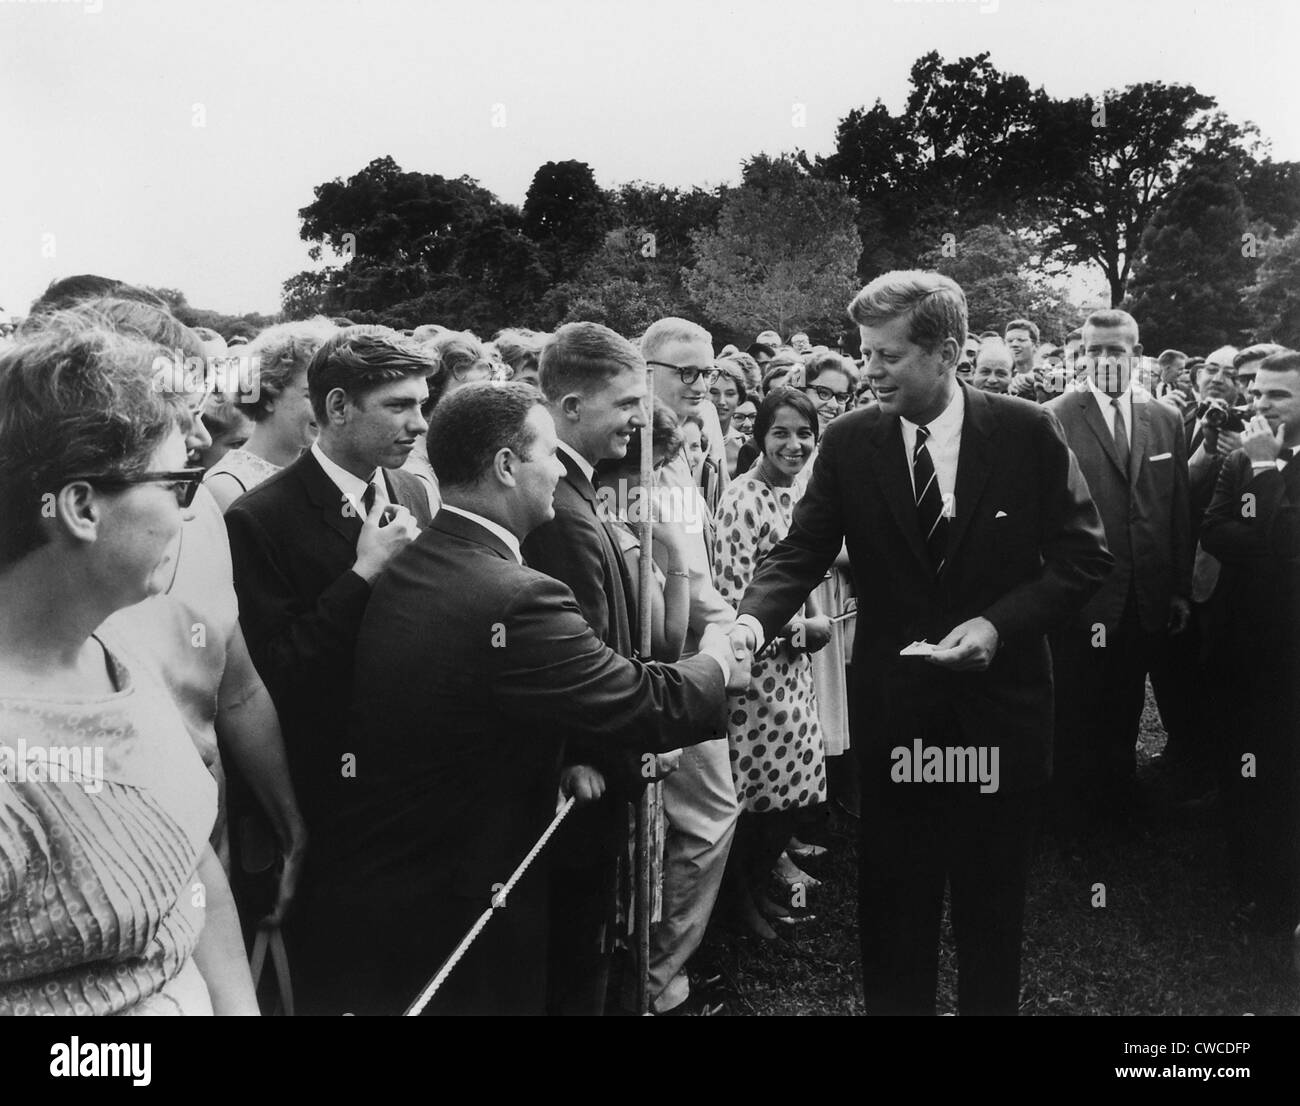 President John Kennedy meets with one of the first groups of Peace Corps volunteers. White House lawn, Aug. 11, 1961. Stock Photo